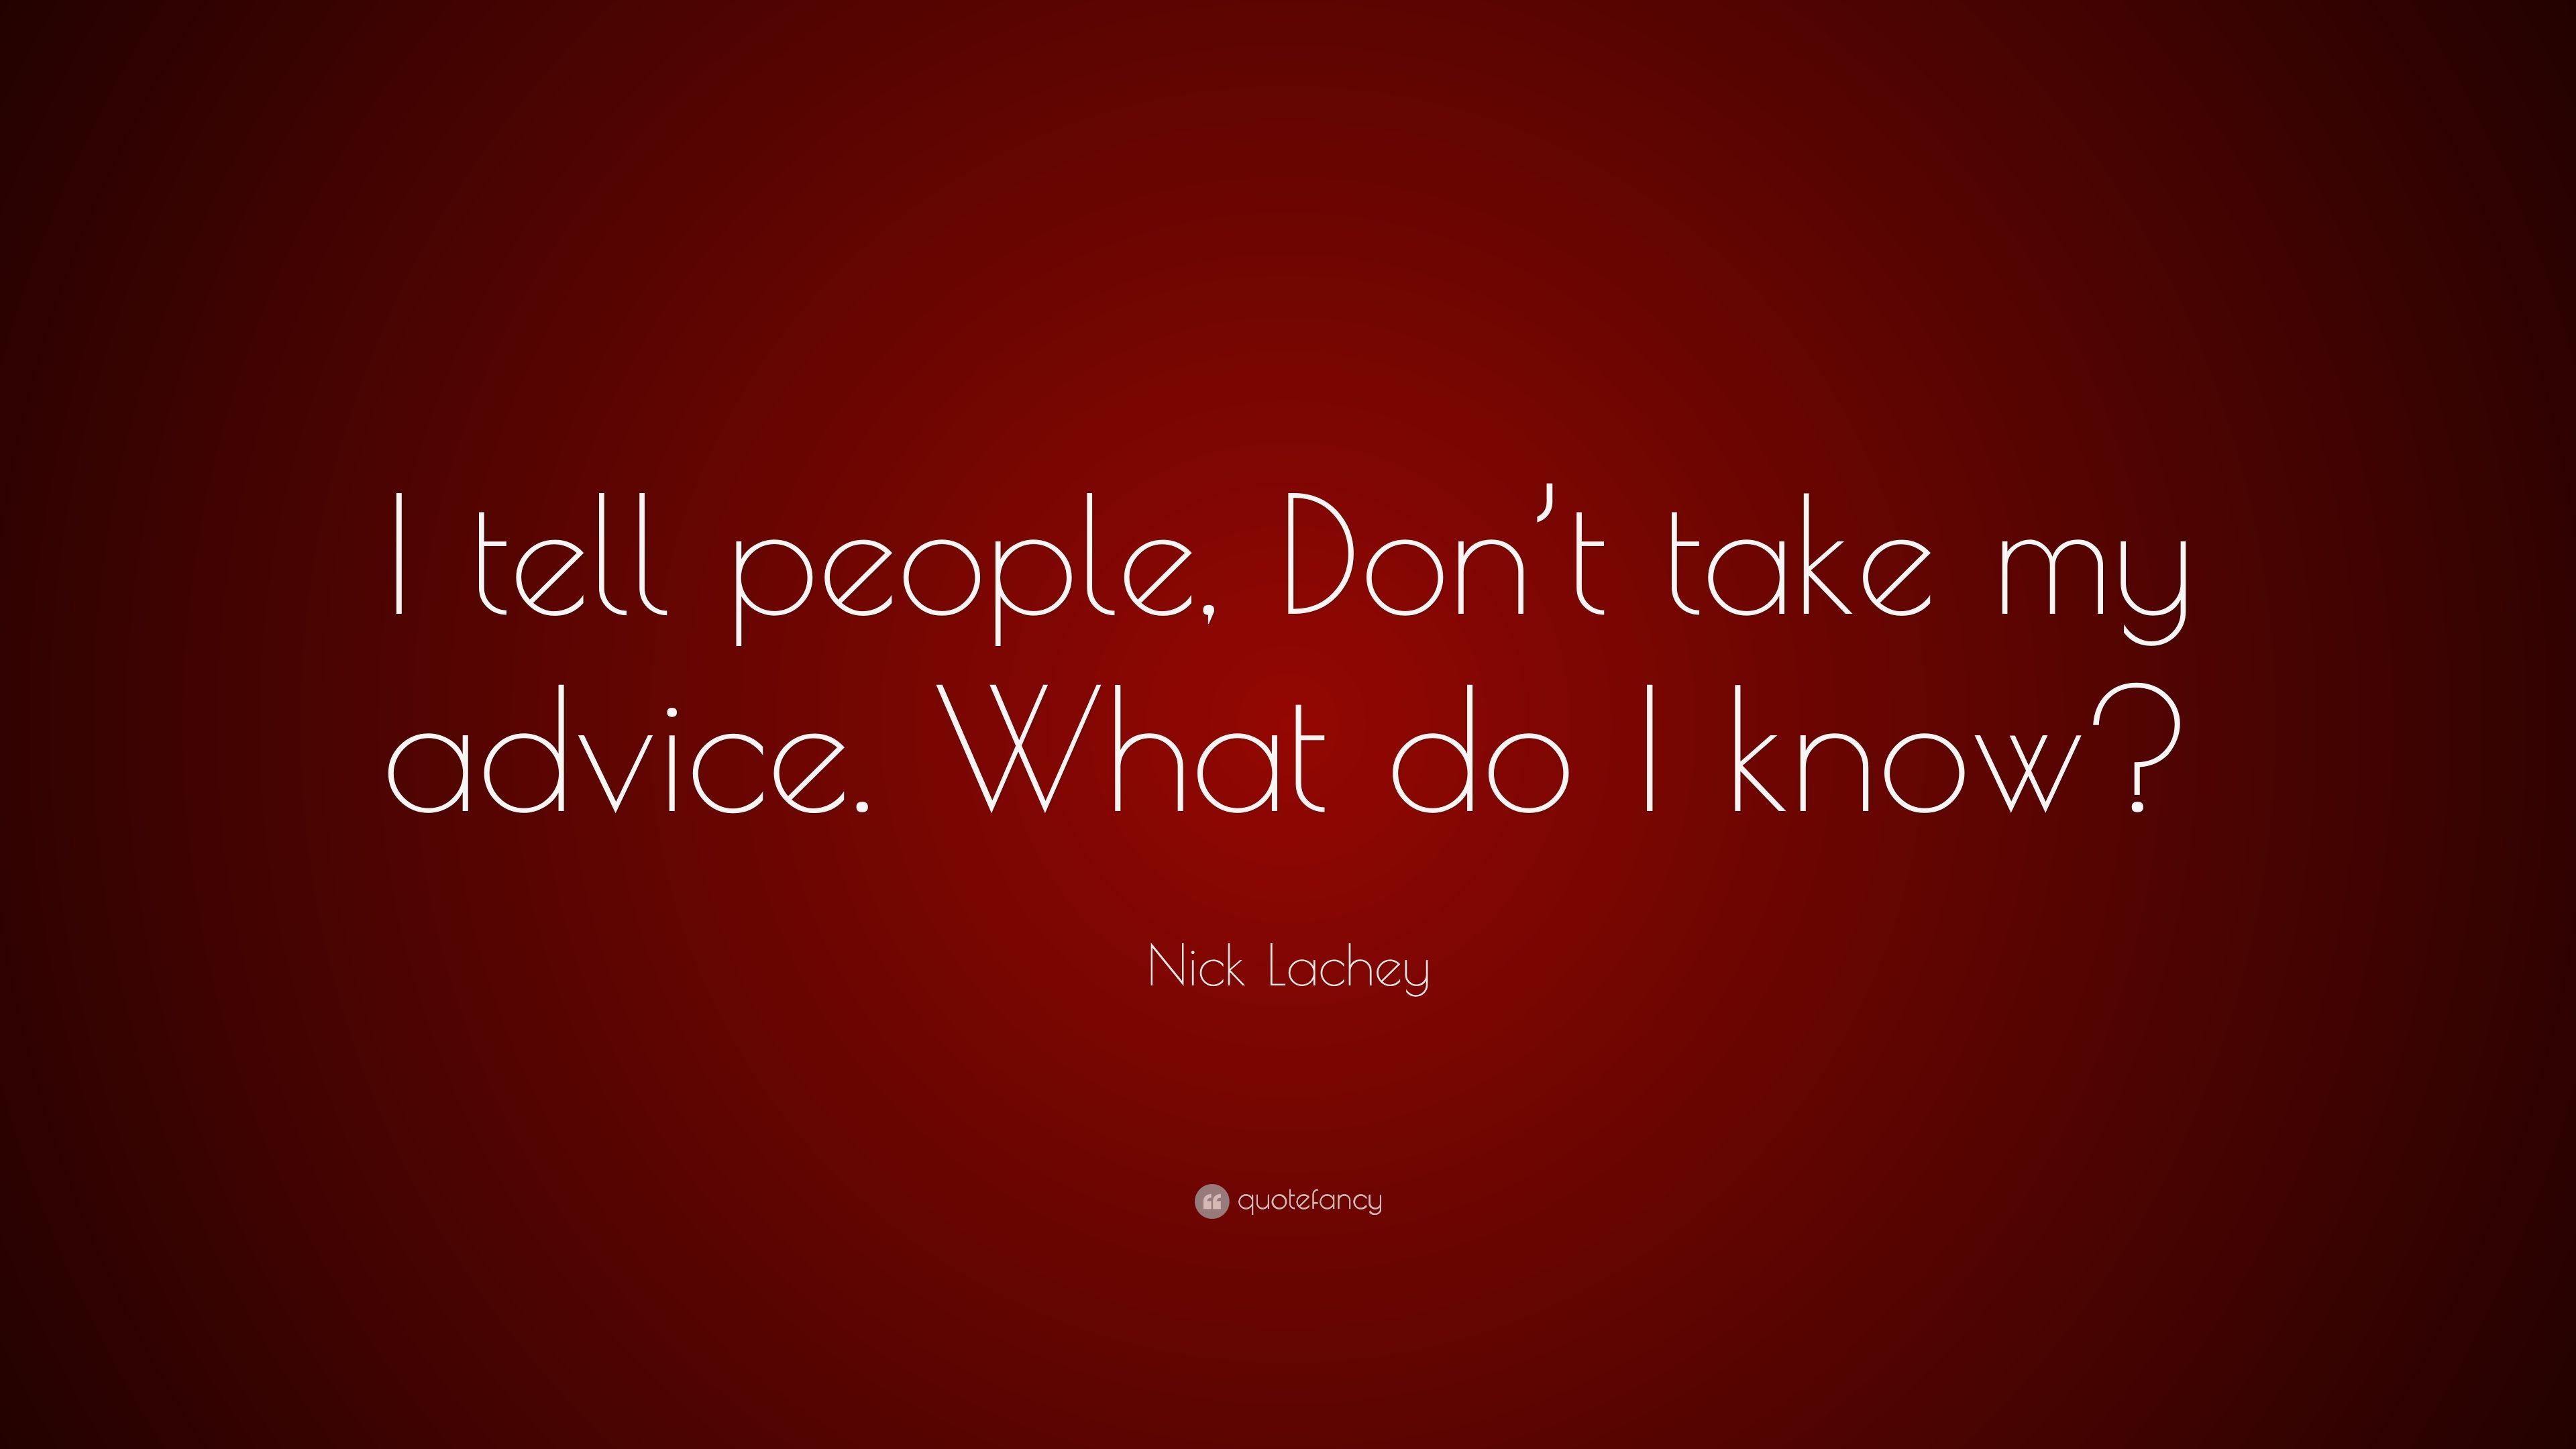 Nick Lachey Quote: “I tell people, Don't take my advice. What do I